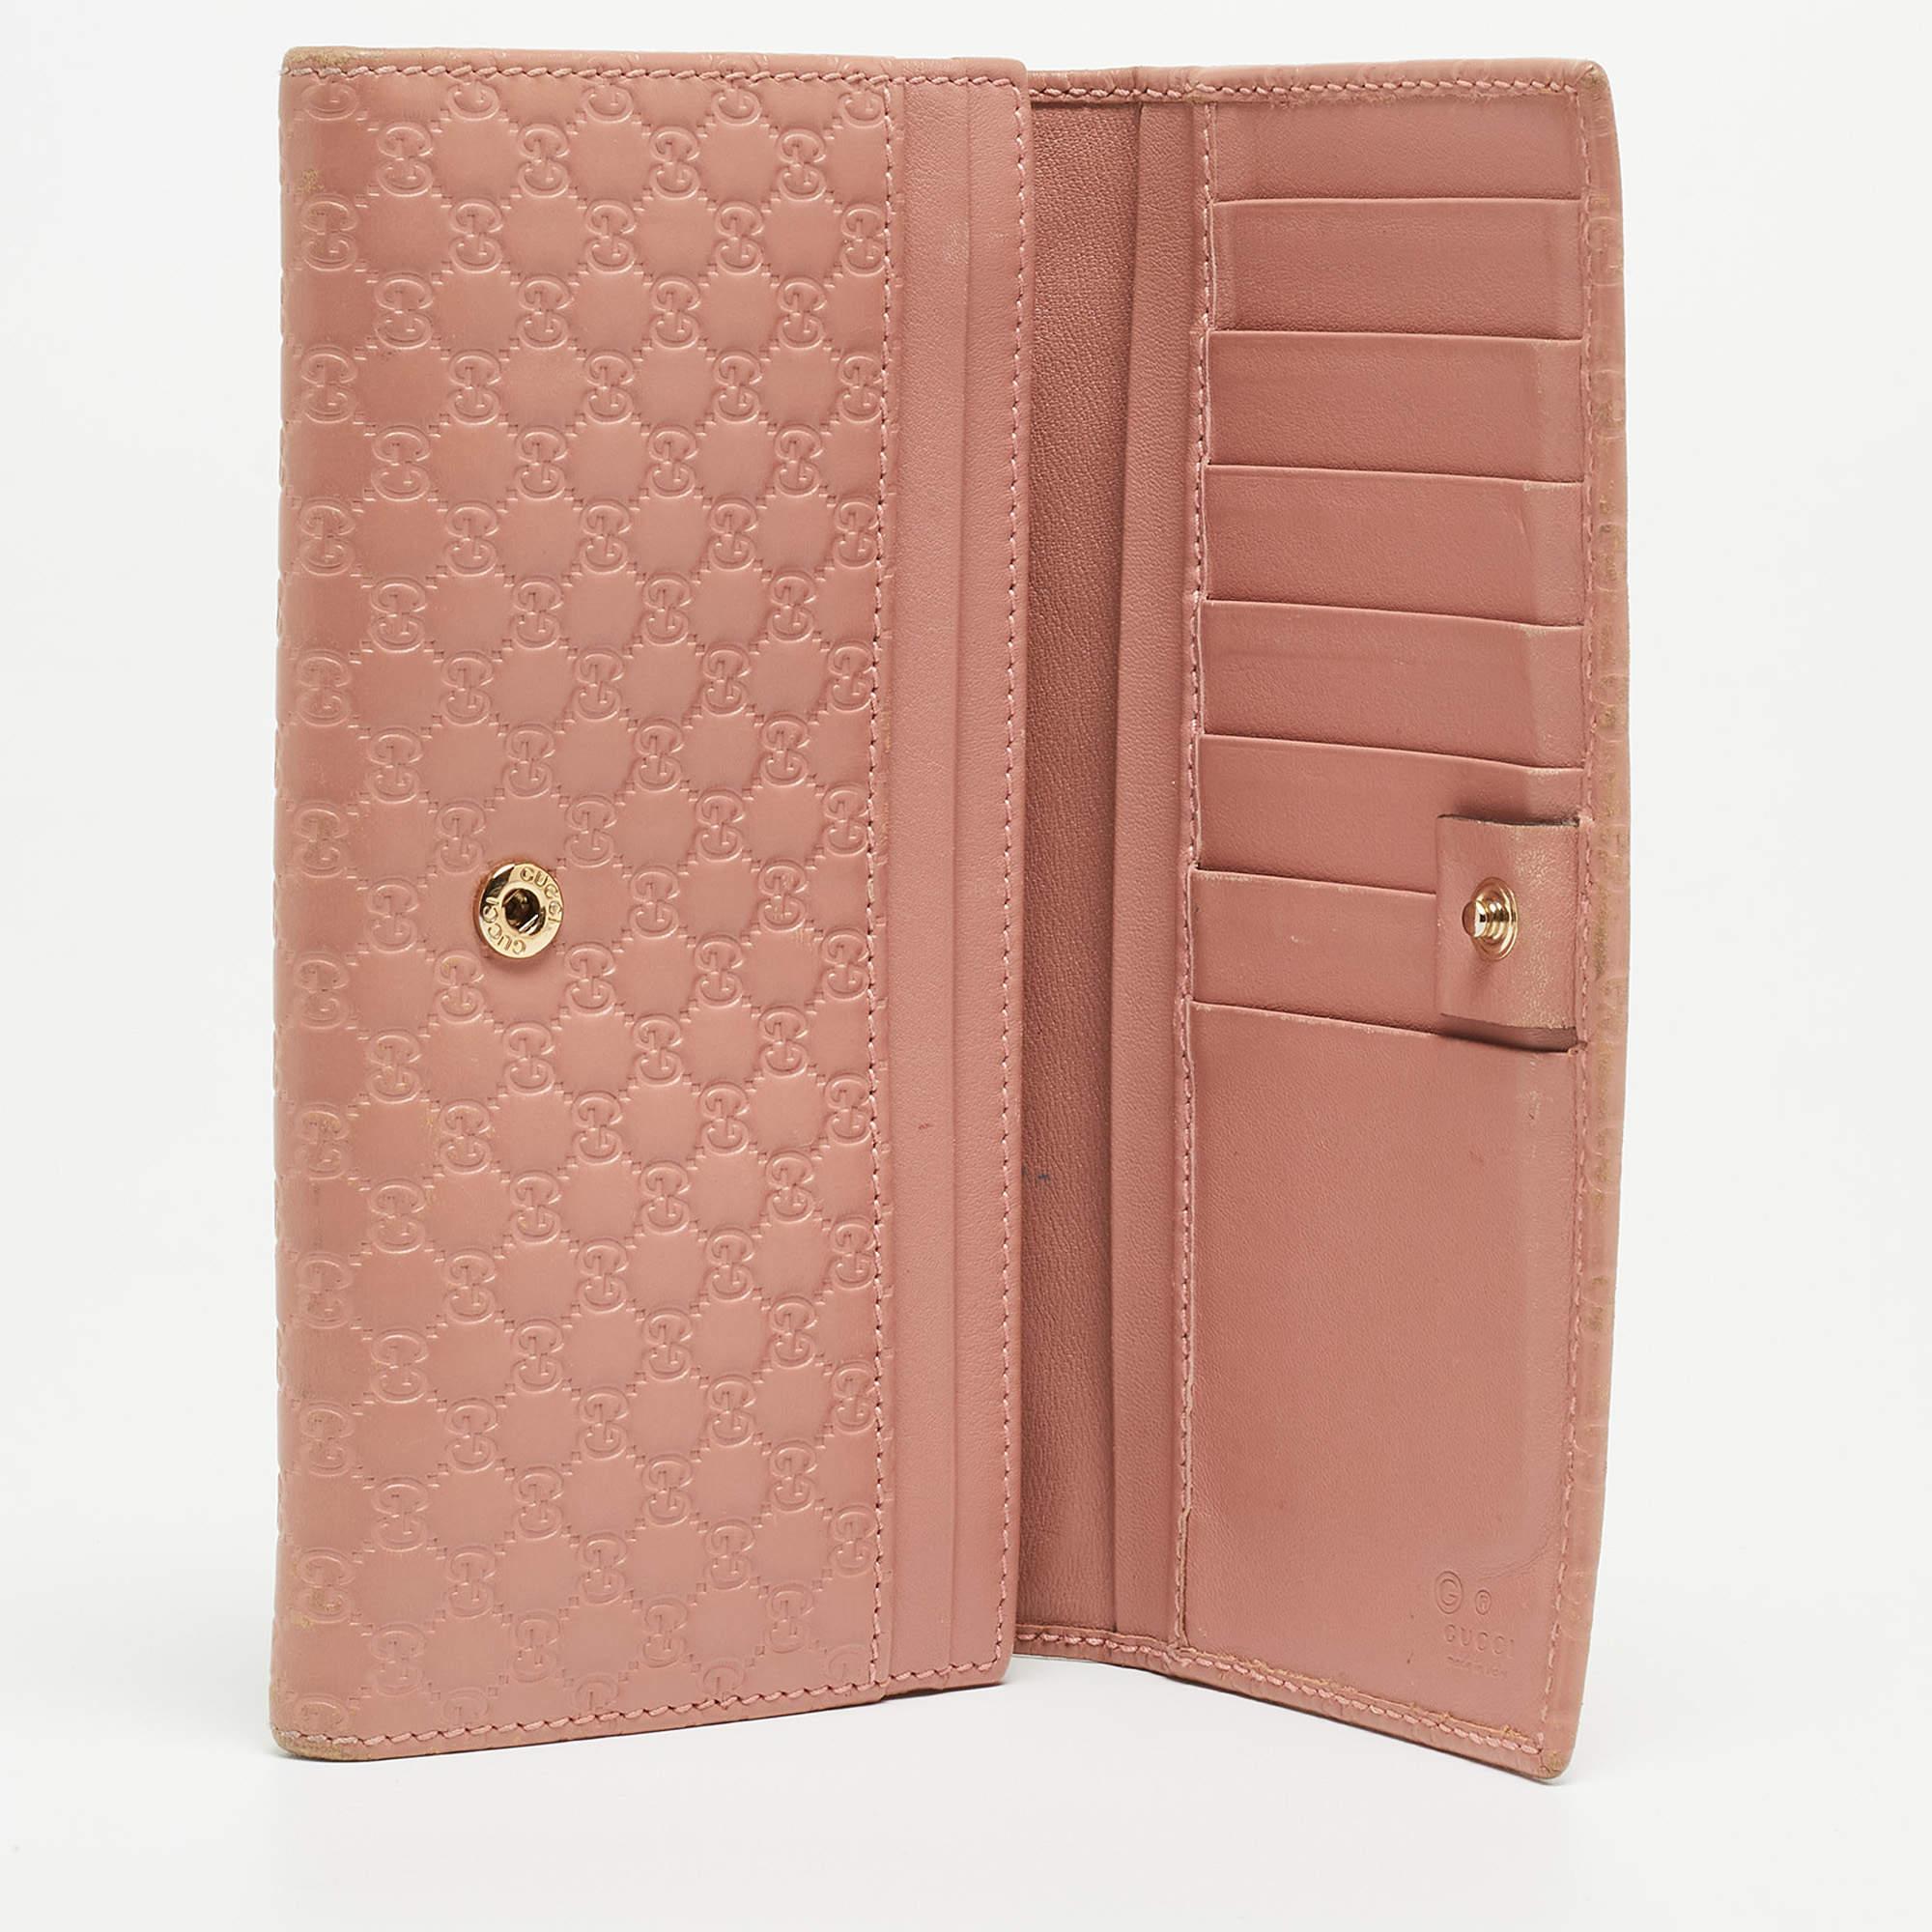 Gucci Pink Microgucissima Leather Flap Continental Wallet For Sale 5